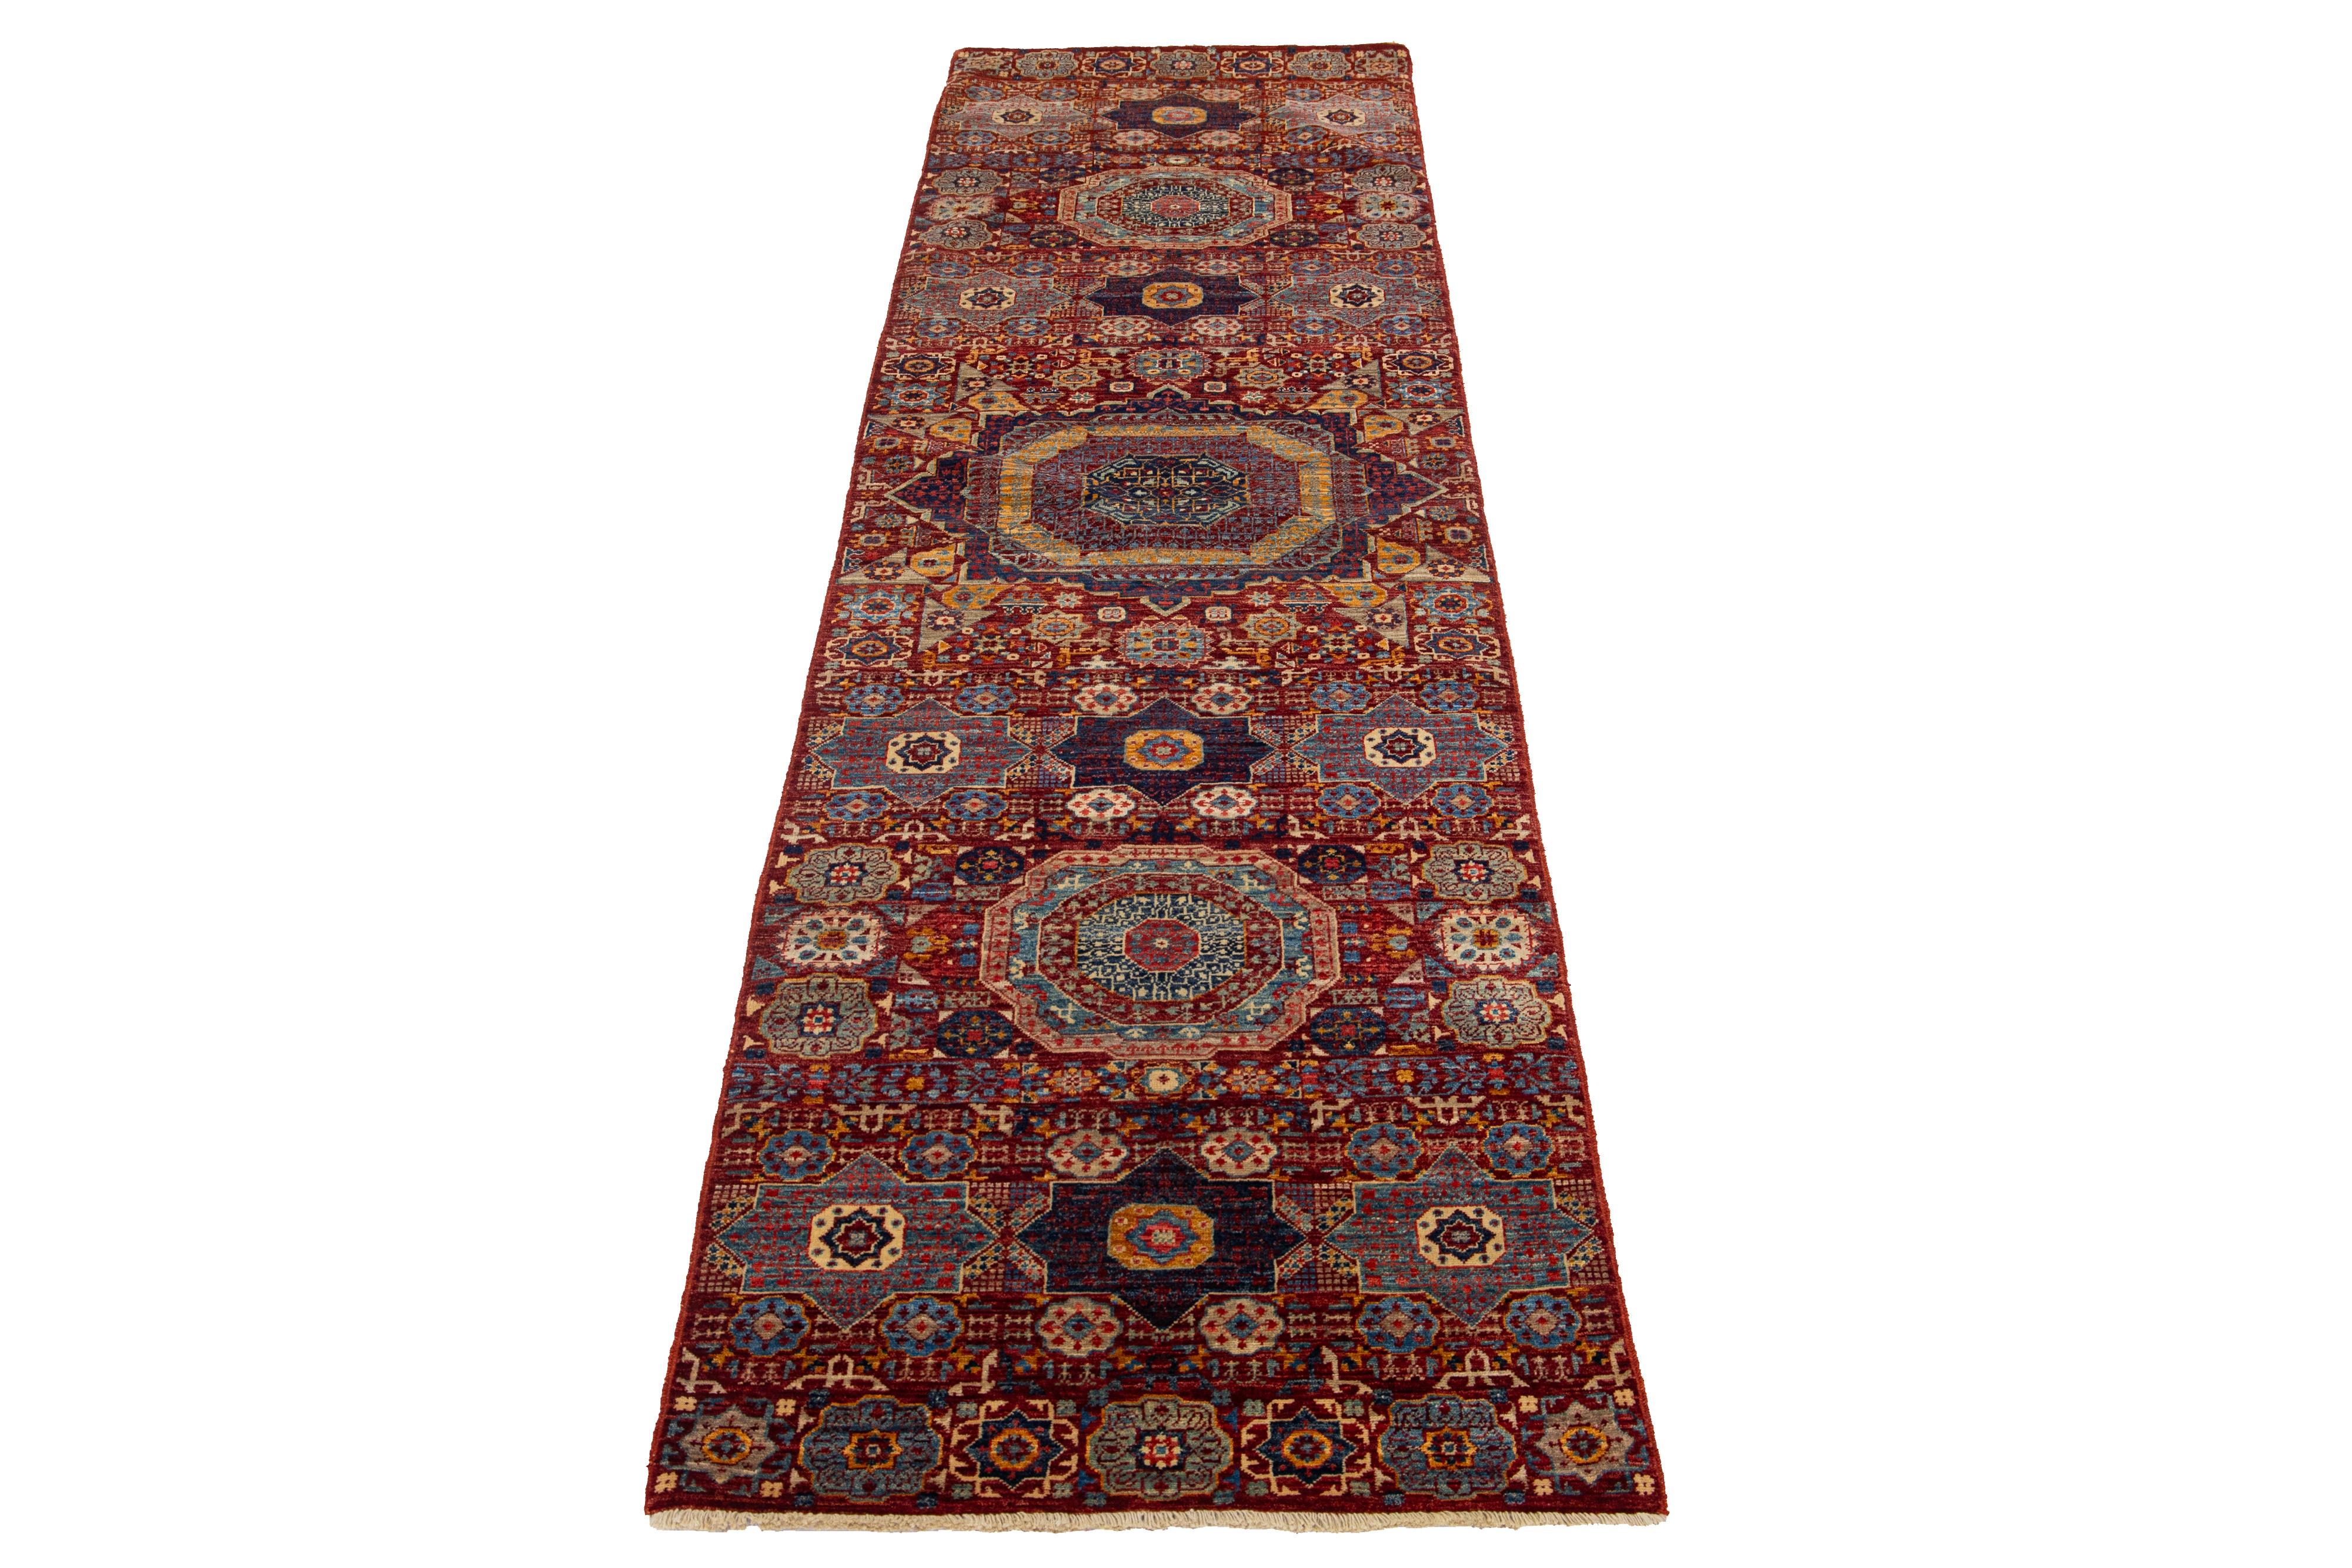 Beautiful modern Transitional hand-knotted wool runner with a red field. This Piece has blue, beige, and yellow accent colors in a gorgeous all-over geometric floral design.

This rug measures 2'9